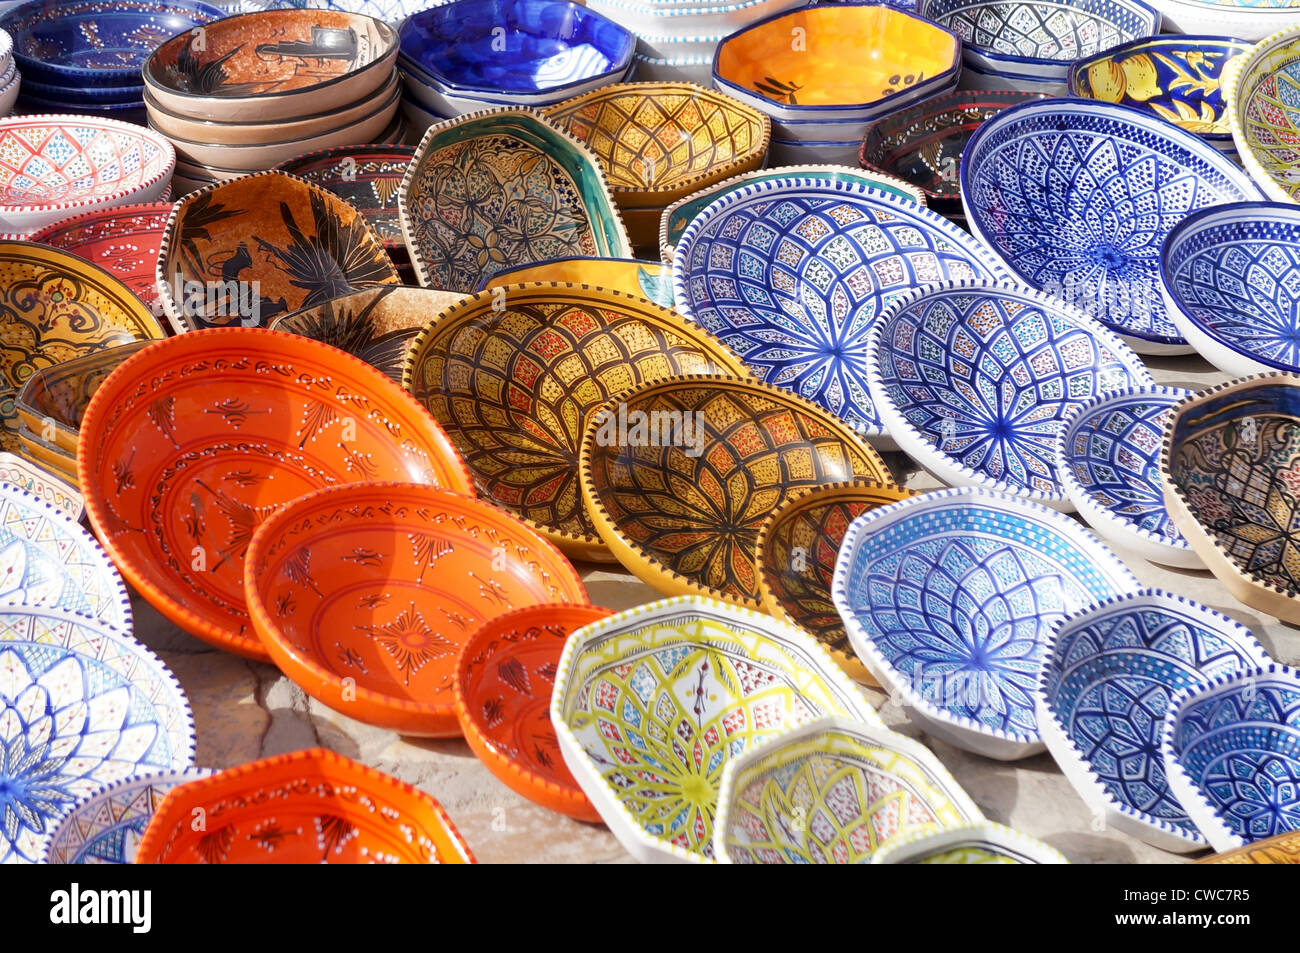 Tunisian Ceramics High Resolution Stock Photography and Images - Alamy